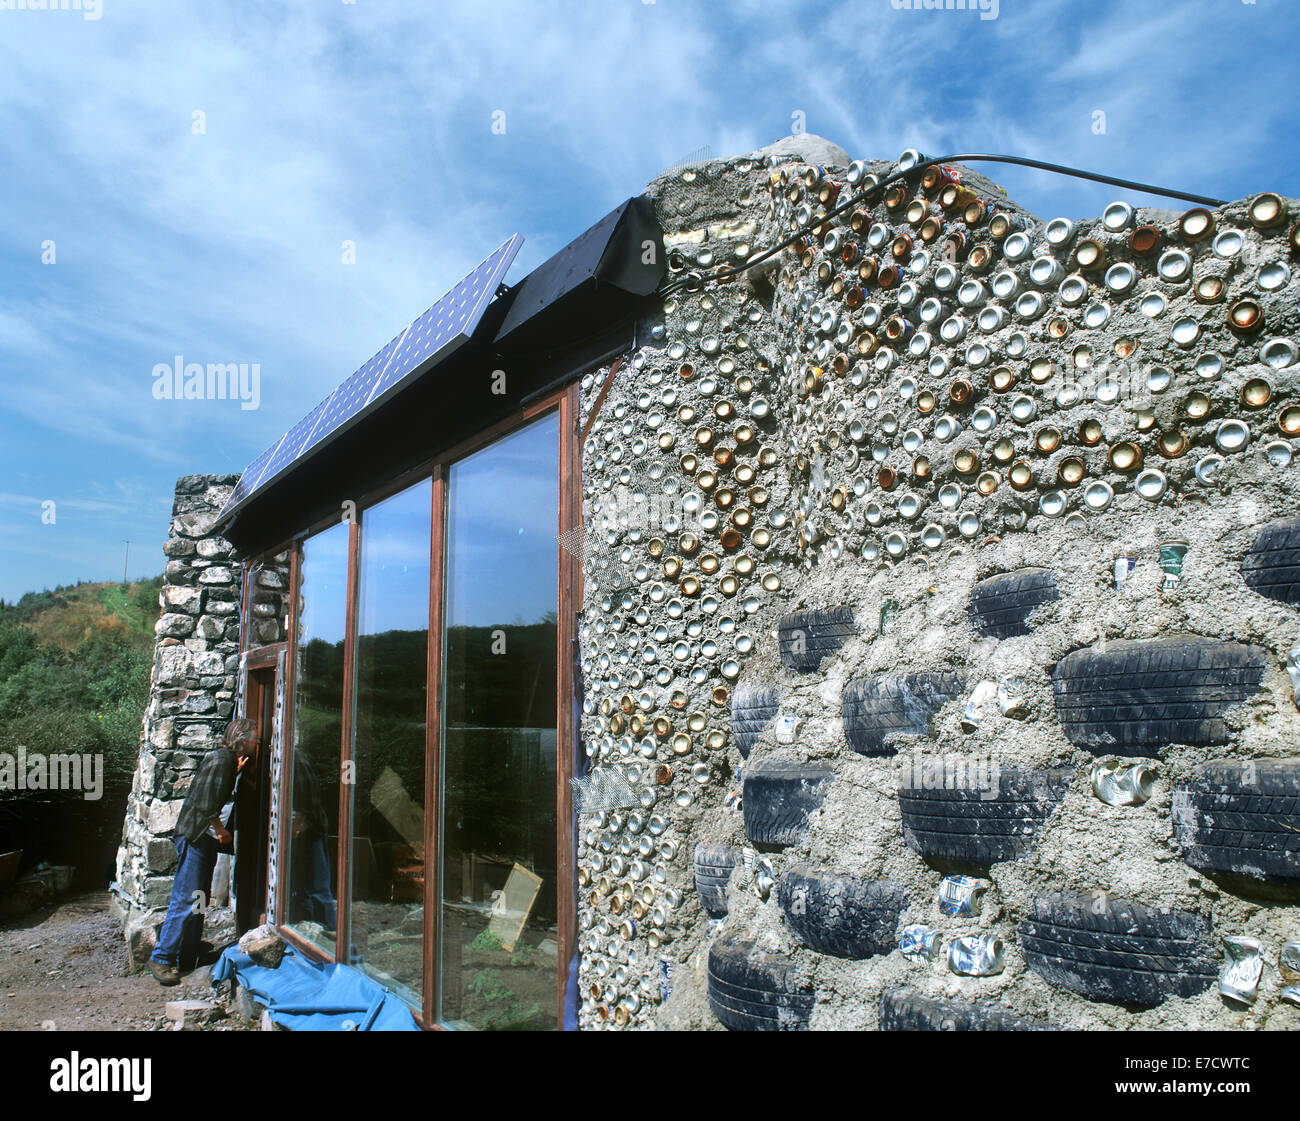 The Fife earthship nearing completion with exposed wall showing reused vehicle tyres and cans, Craigencalt Ecology Centre, Kinghorn, Fife, Scotland. Stock Photo